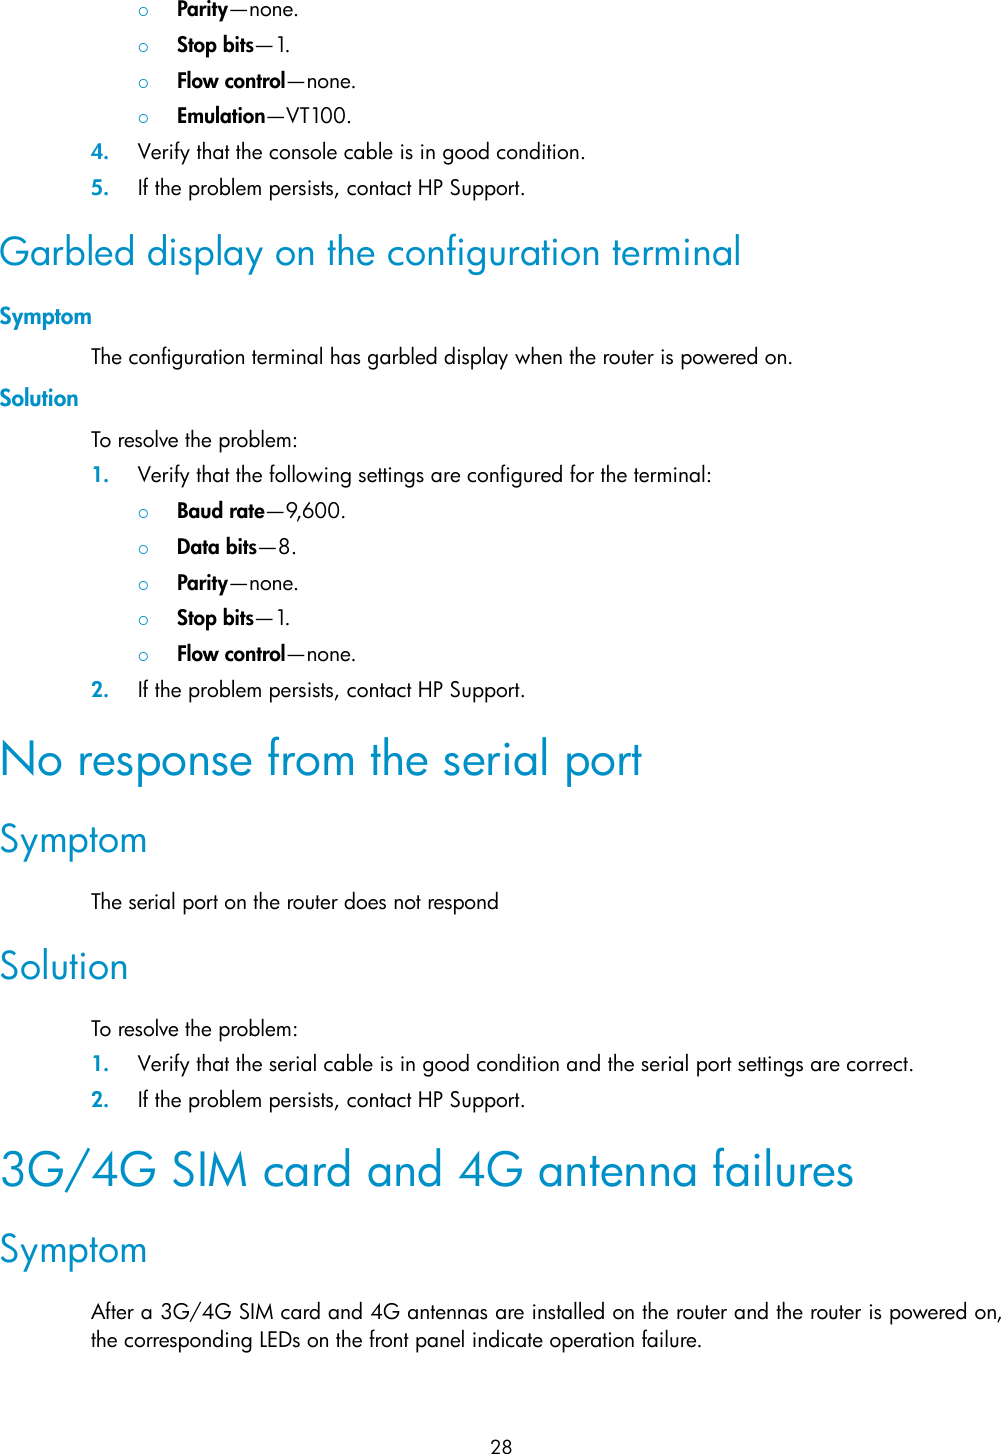  28   Parity—none.   Stop bits—1.   Flow control—none.   Emulation—VT100. 4. Verify that the console cable is in good condition. 5. If the problem persists, contact HP Support. Garbled display on the configuration terminal Symptom The configuration terminal has garbled display when the router is powered on. Solution To resolve the problem: 1. Verify that the following settings are configured for the terminal:   Baud rate—9,600.    Data bits—8.    Parity—none.   Stop bits—1.   Flow control—none. 2. If the problem persists, contact HP Support. No response from the serial port Symptom The serial port on the router does not respond Solution To resolve the problem: 1. Verify that the serial cable is in good condition and the serial port settings are correct. 2. If the problem persists, contact HP Support. 3G/4G SIM card and 4G antenna failures Symptom After a 3G/4G SIM card and 4G antennas are installed on the router and the router is powered on, the corresponding LEDs on the front panel indicate operation failure. 